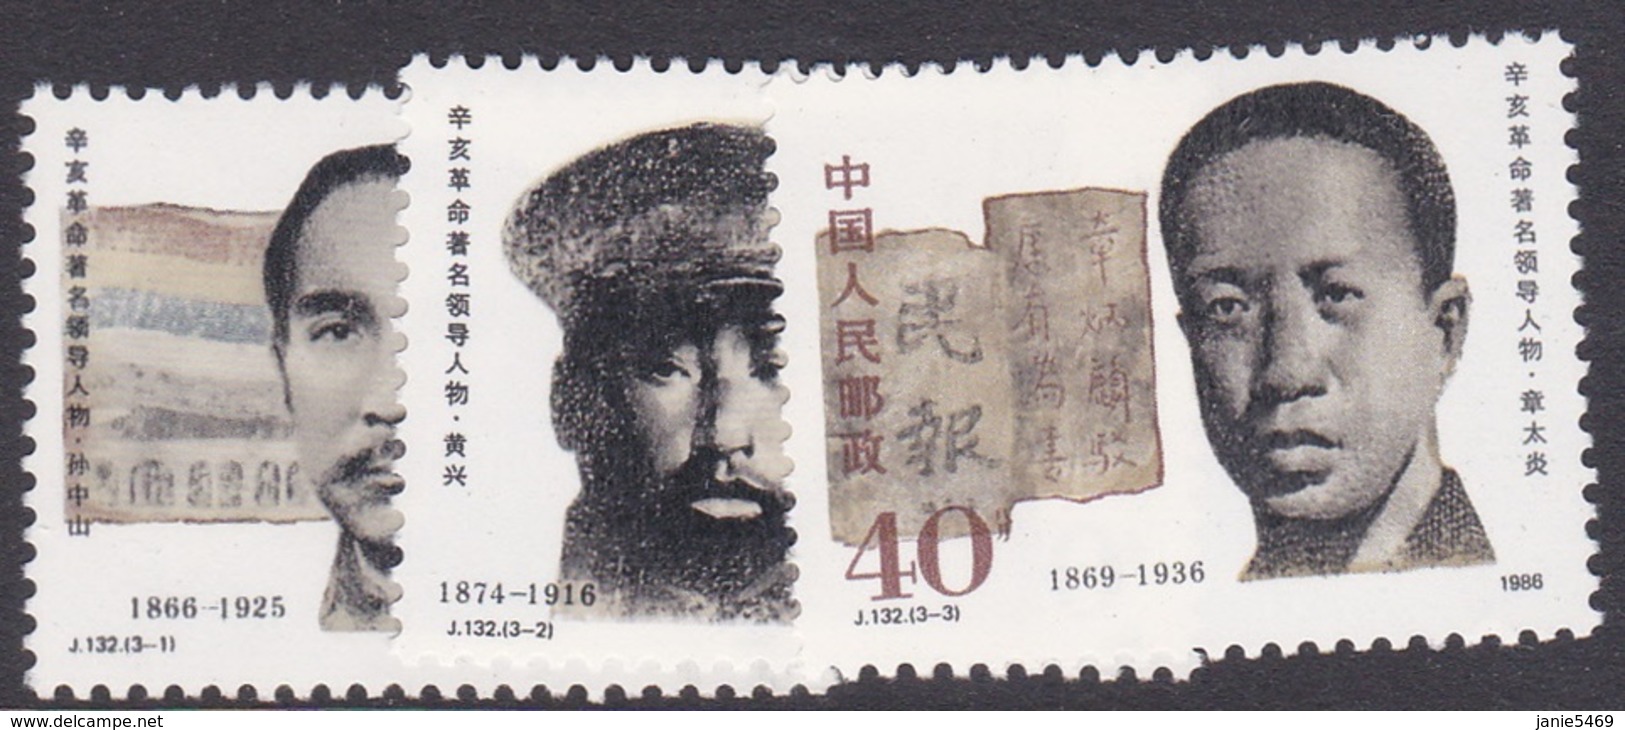 China People's Republic SG 3466-3468 1986 75th Anniversary Of 1911 Revolution Leaders, Mint Never Hinged - Unused Stamps